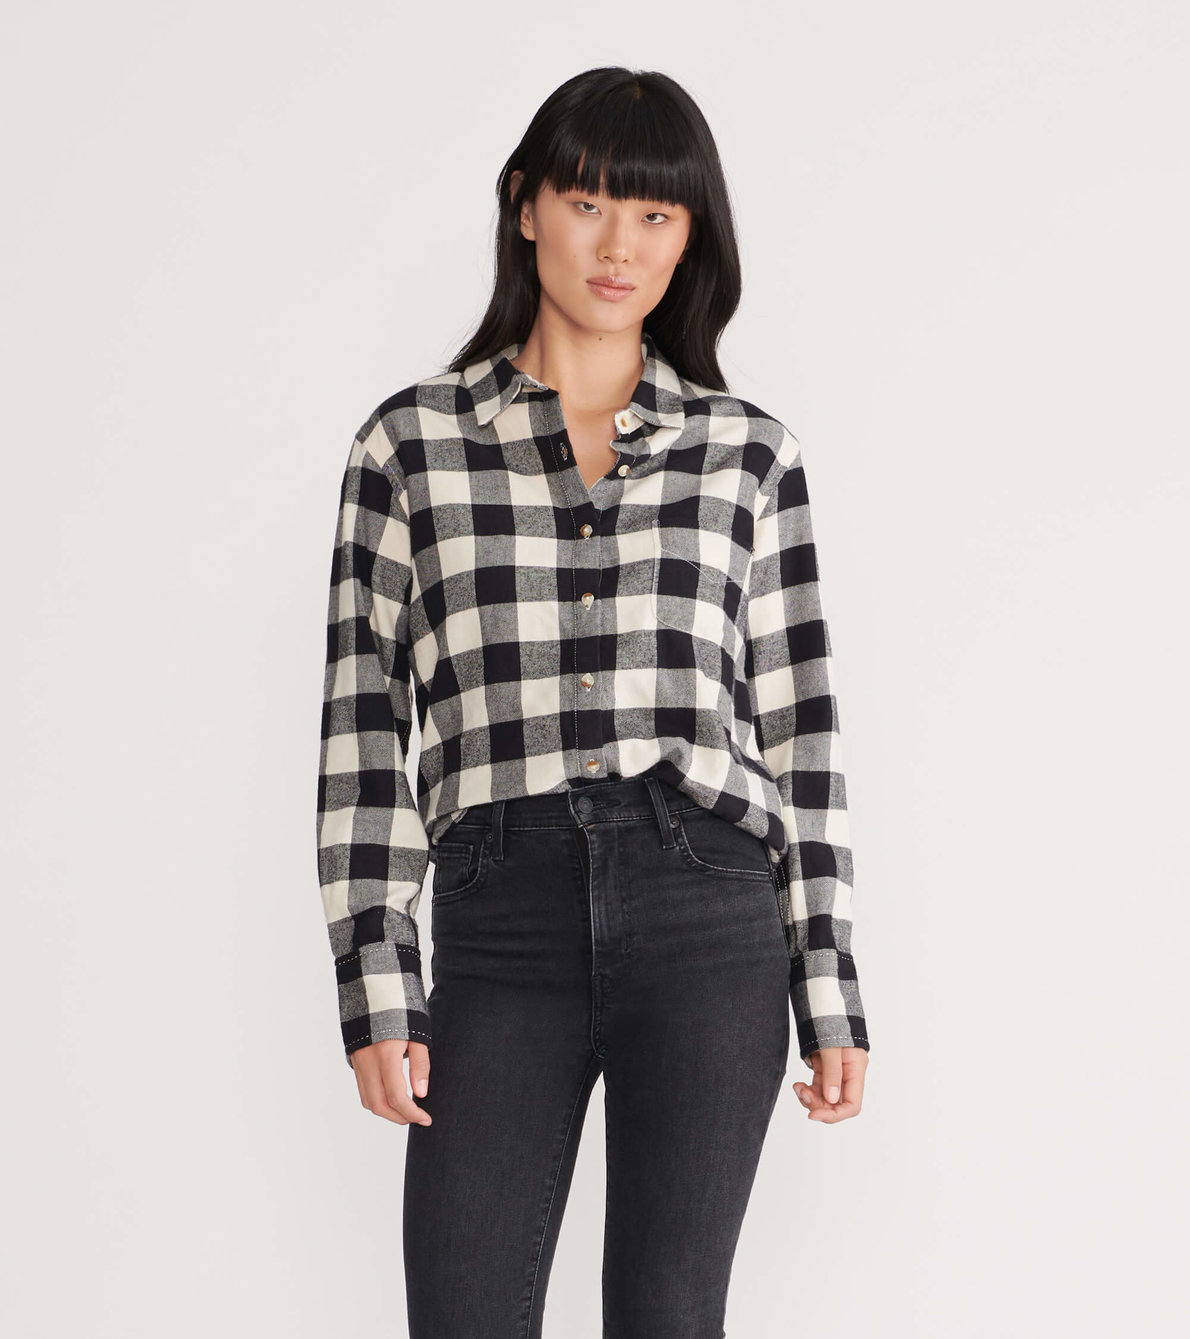 View larger image of Black Plaid Women's Heritage Flannel Shirt